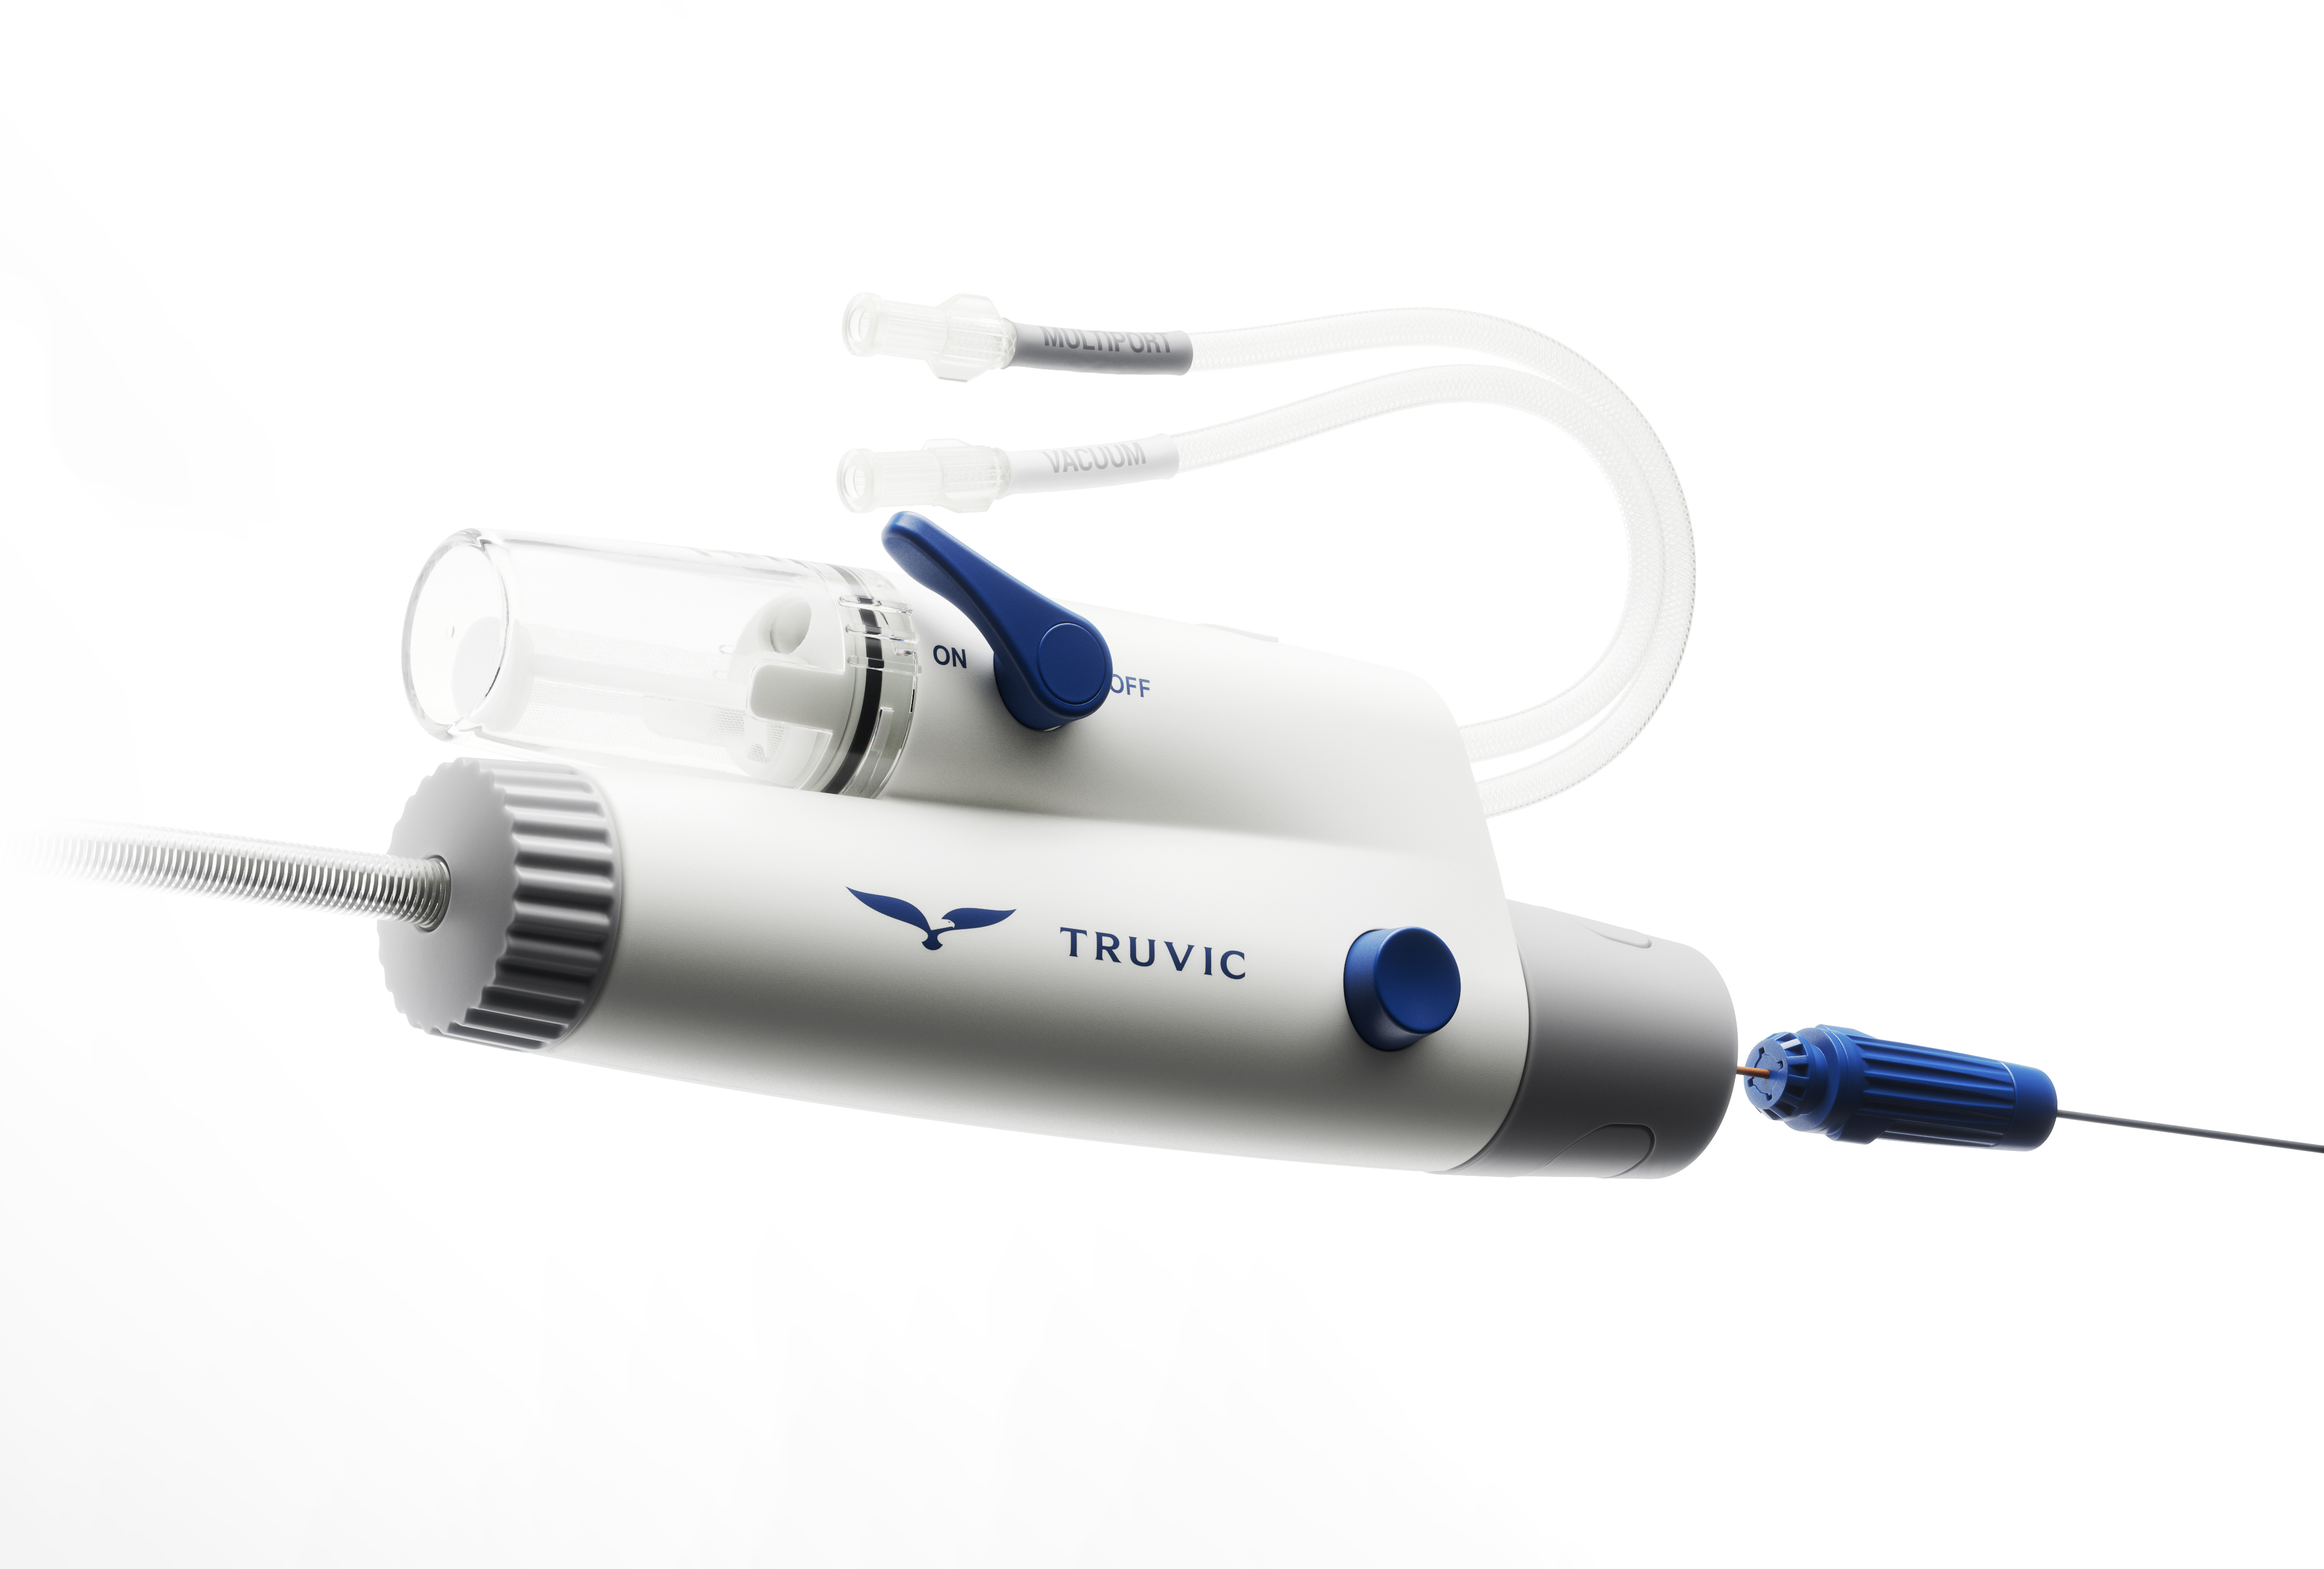 Imperative Care Symphony™ Thrombectomy System